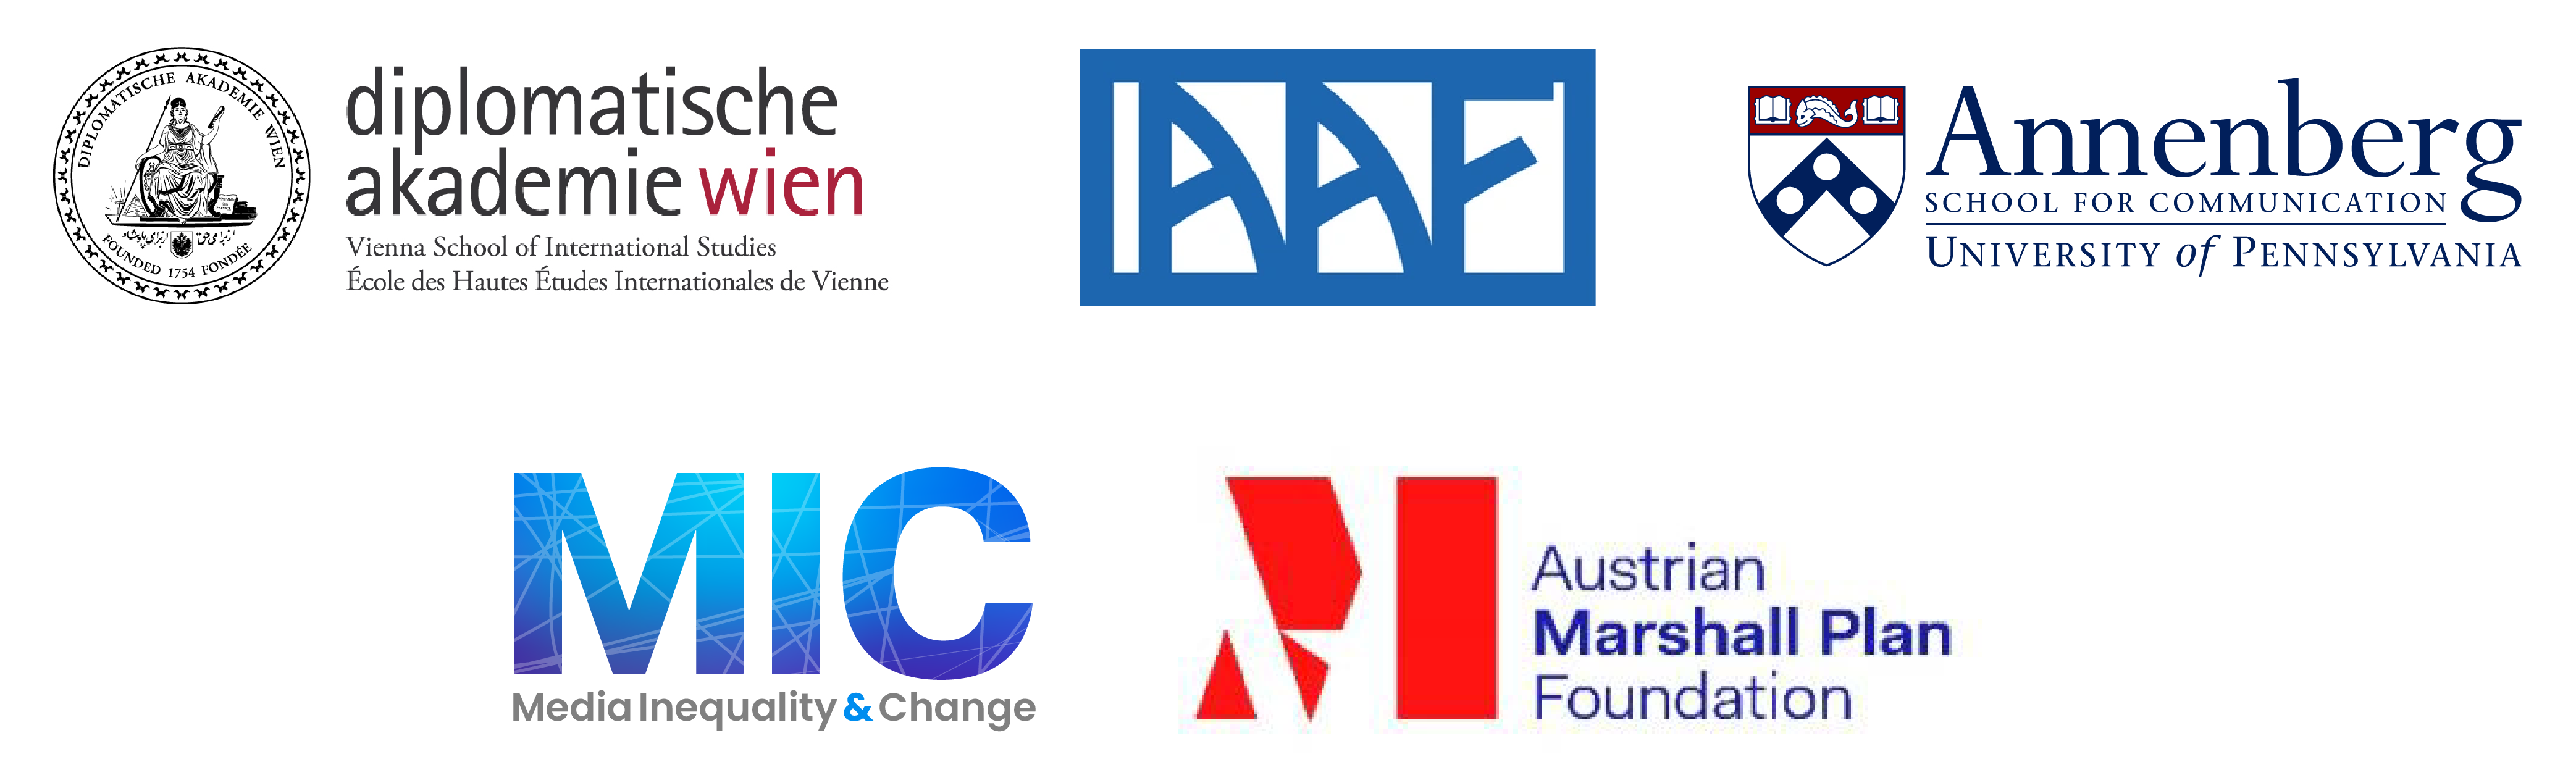 Logos Diplomatic Academy of Vienna, AAF, Annenberg School for Communication, MIC Center, and Austrian Marshall Plan Foundation